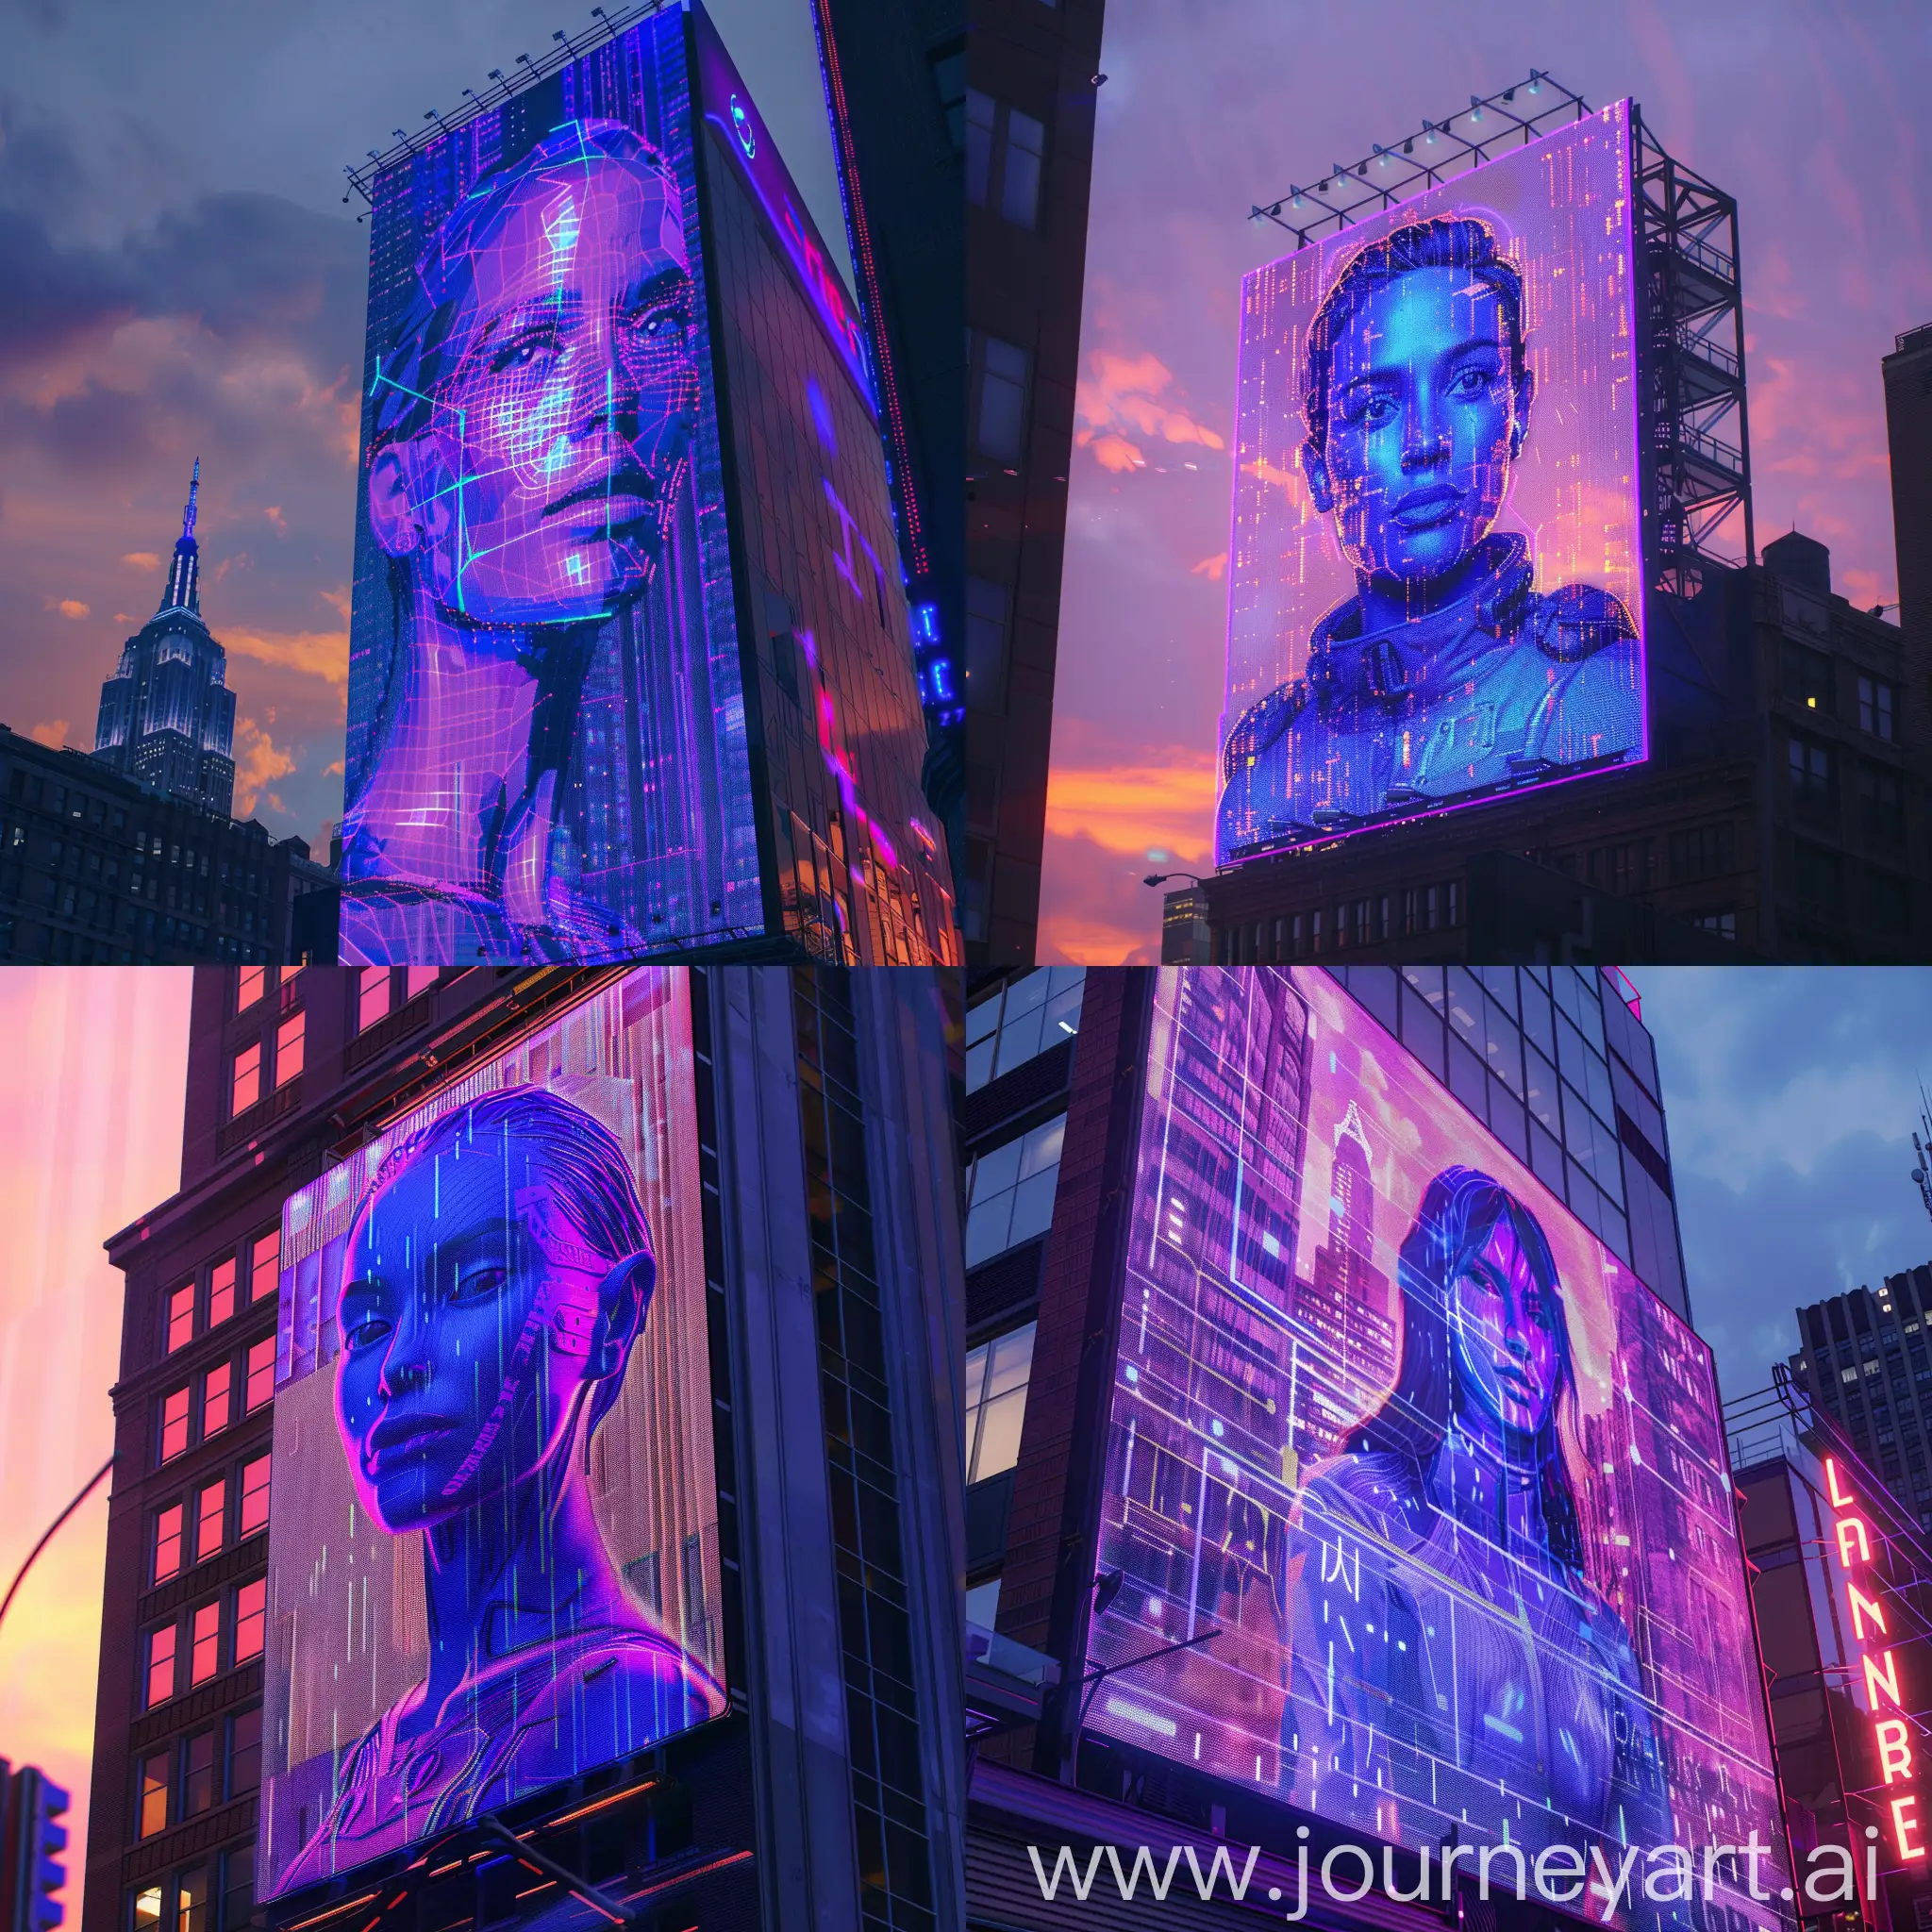 a purple blue holographic digital woman on the billboard building, sunset time, style raw, concept, visuals, futuristic, close up, city, year 2049, new york city, natural lighting